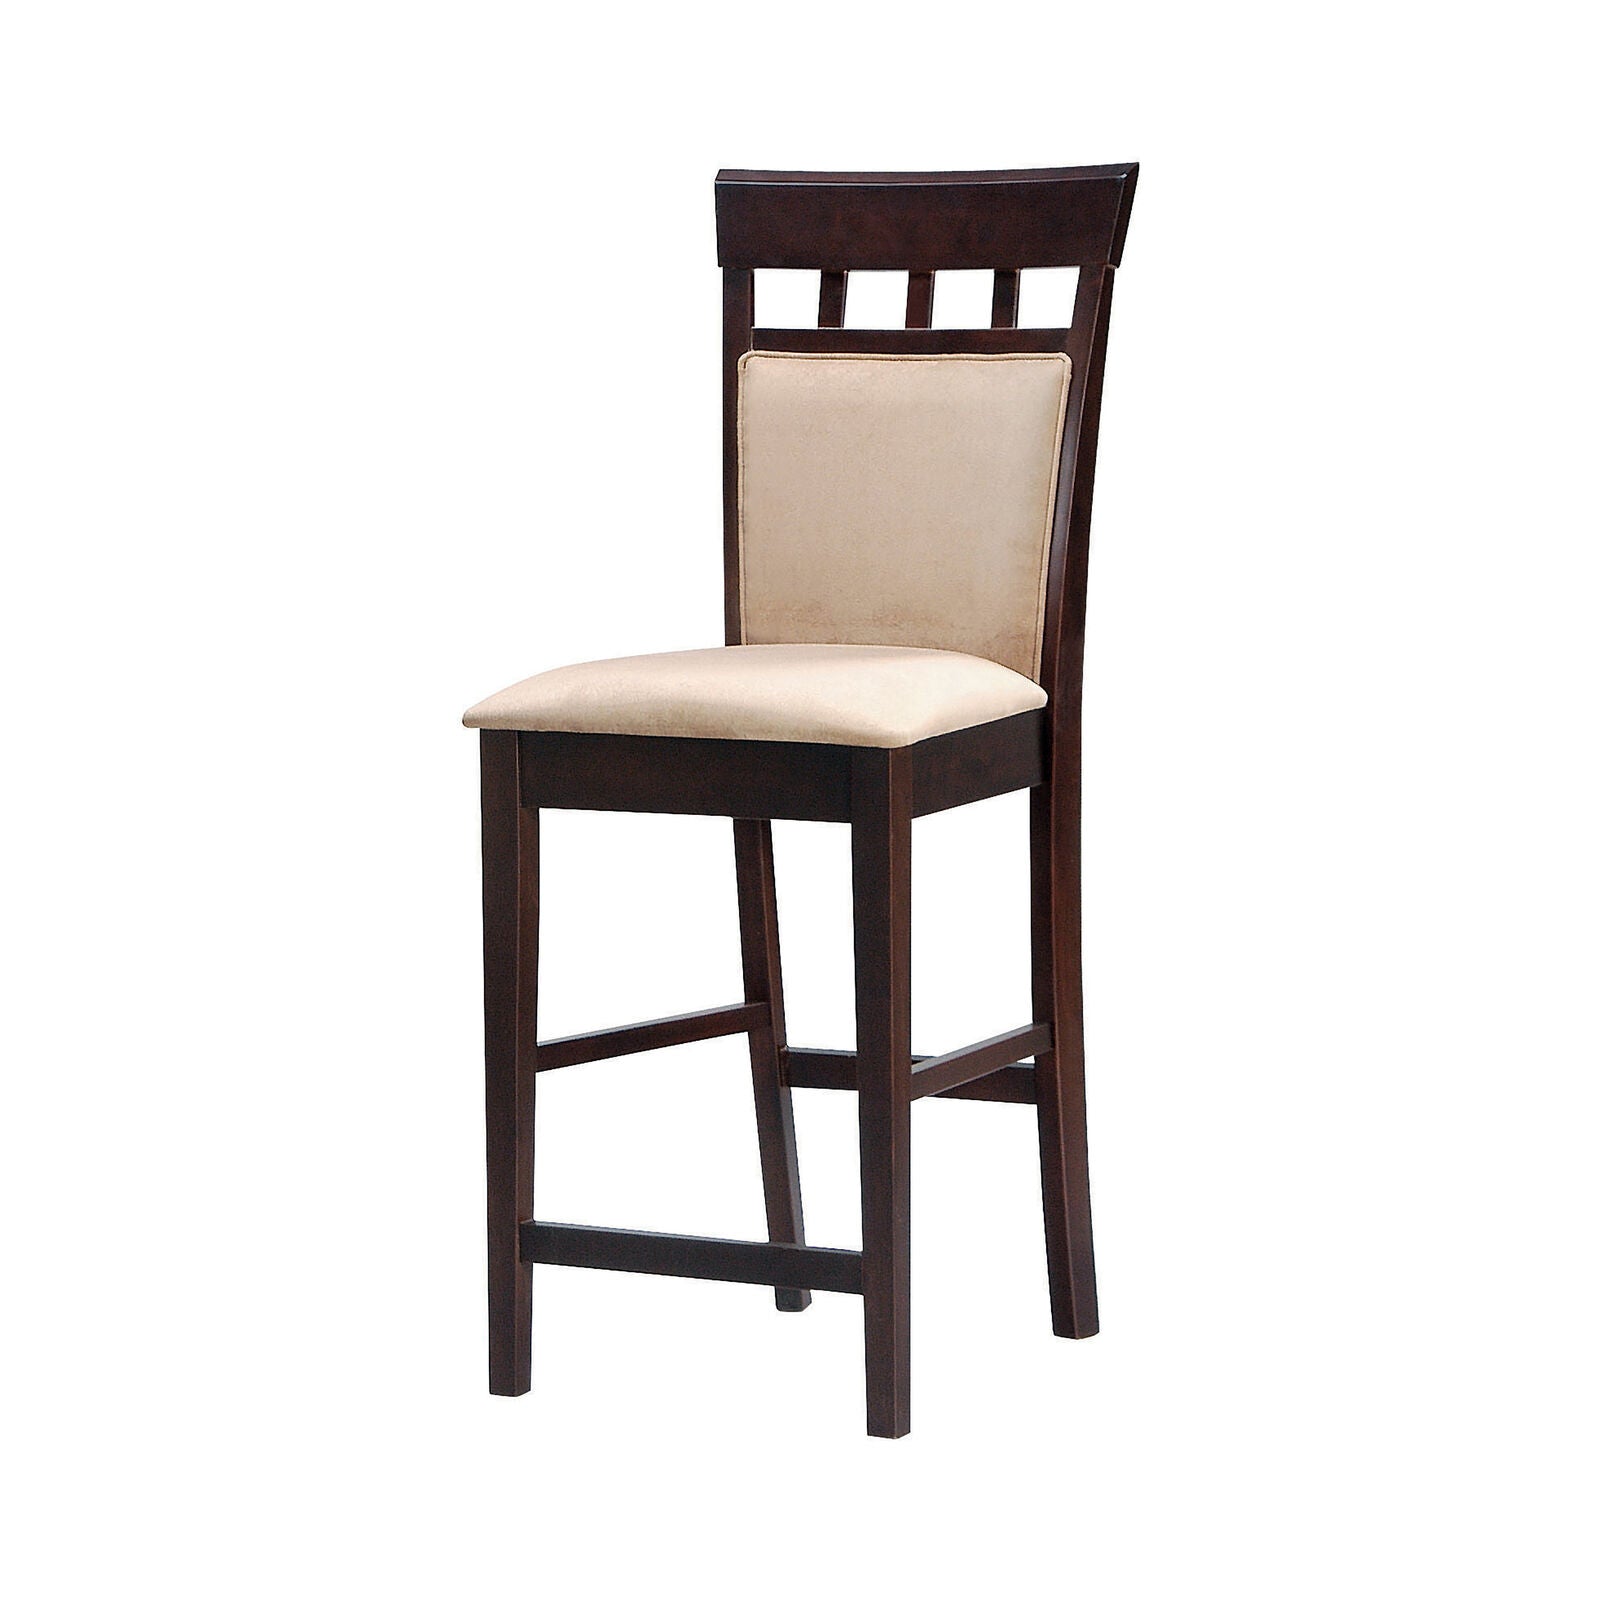 Paxton Upholstered Counter Height Stools Chairs Cappuccino And Tan (Set Of 2)